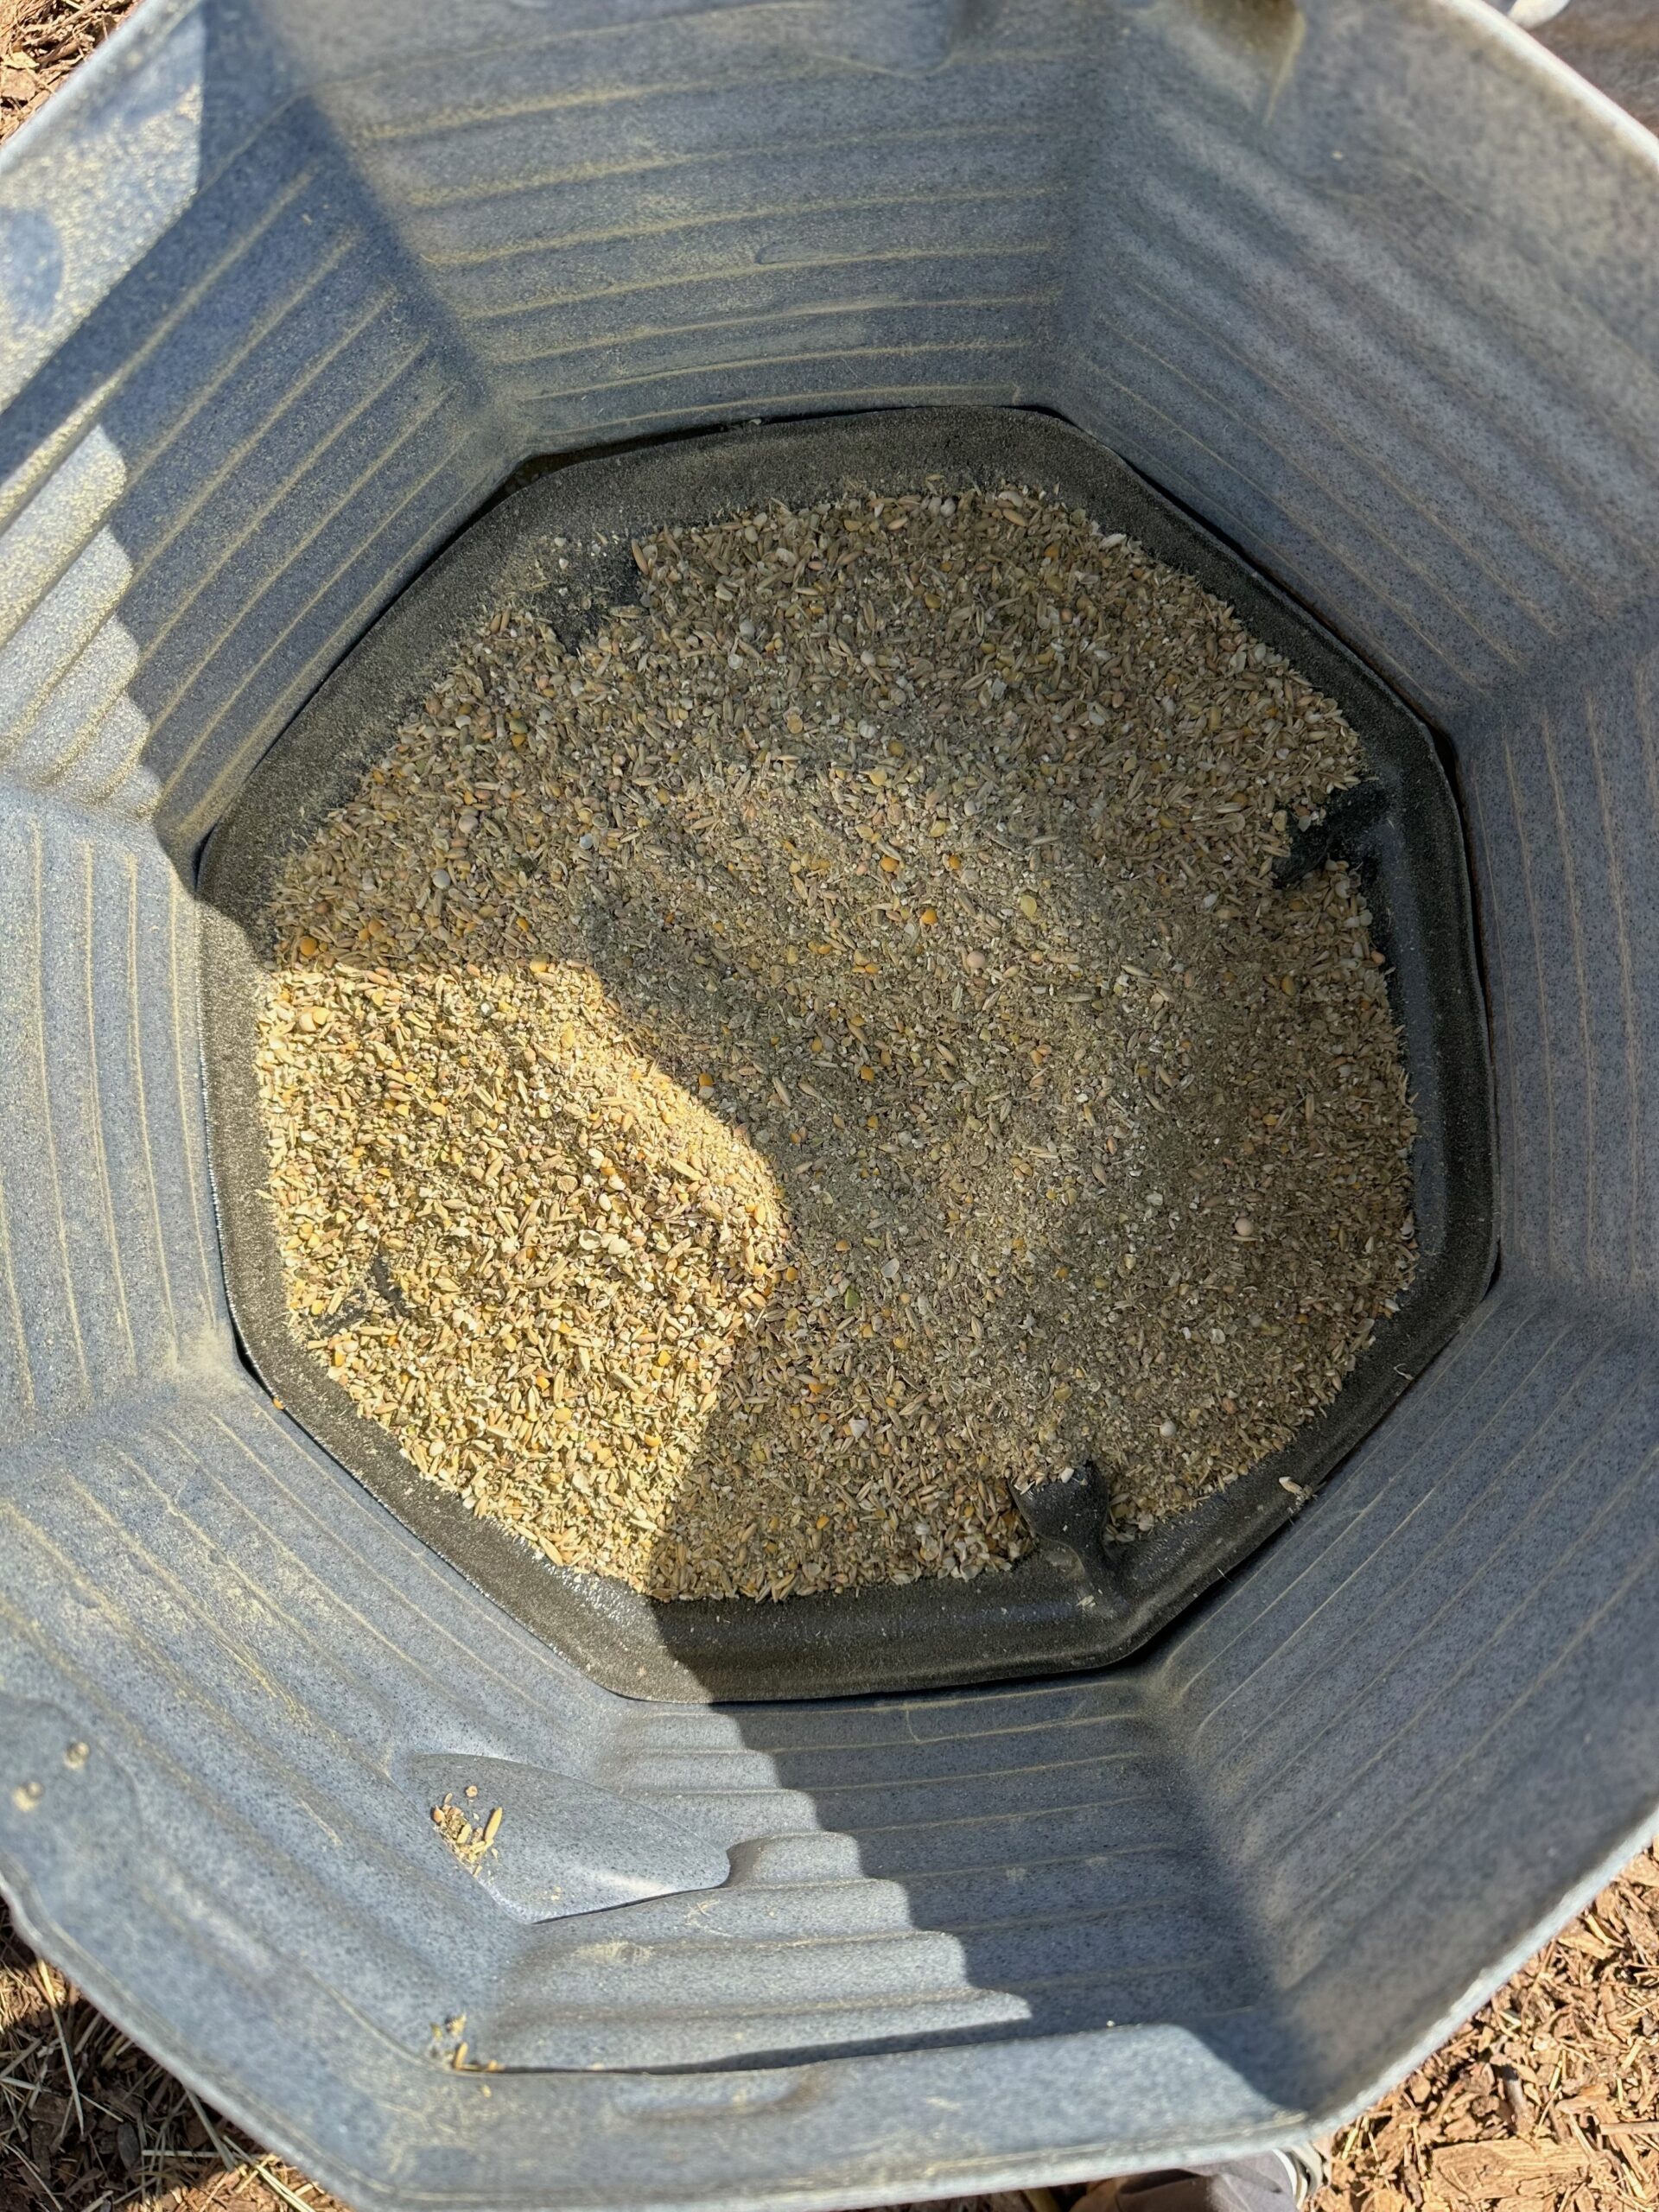 Depending on the size you pick, the silo holds 40 or 80 pounds of feed